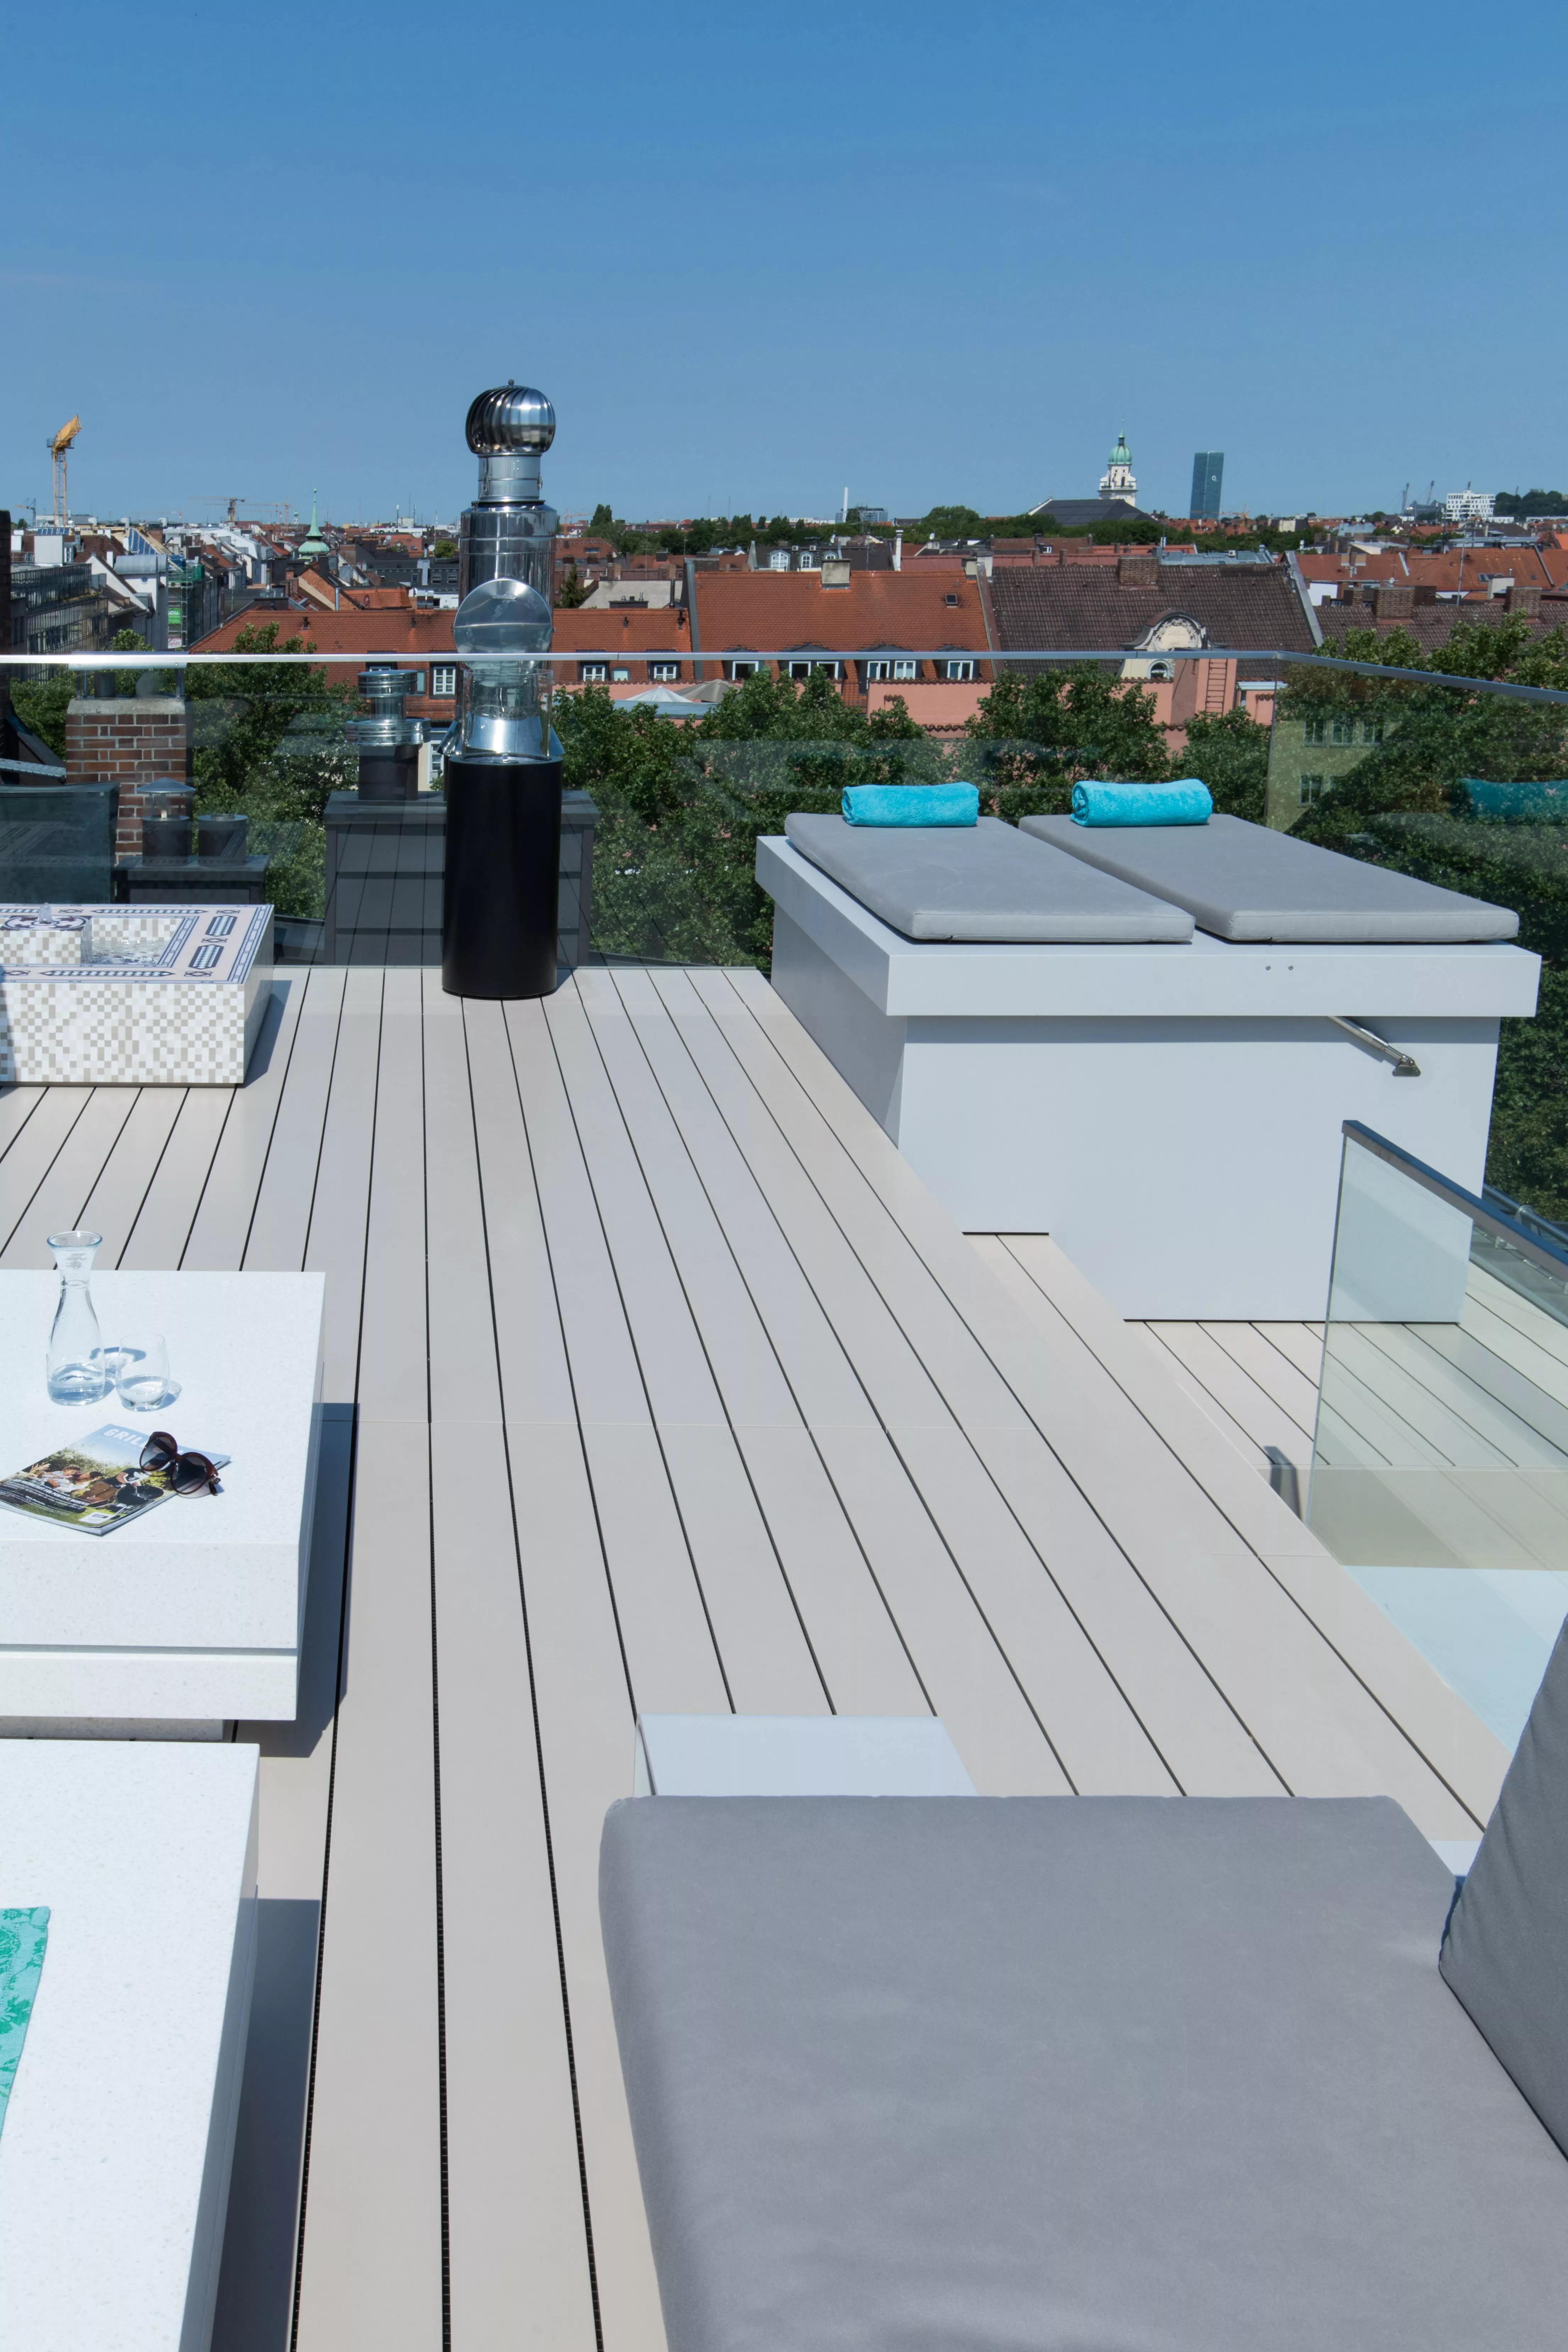 Luxury on the rooftops of Munich